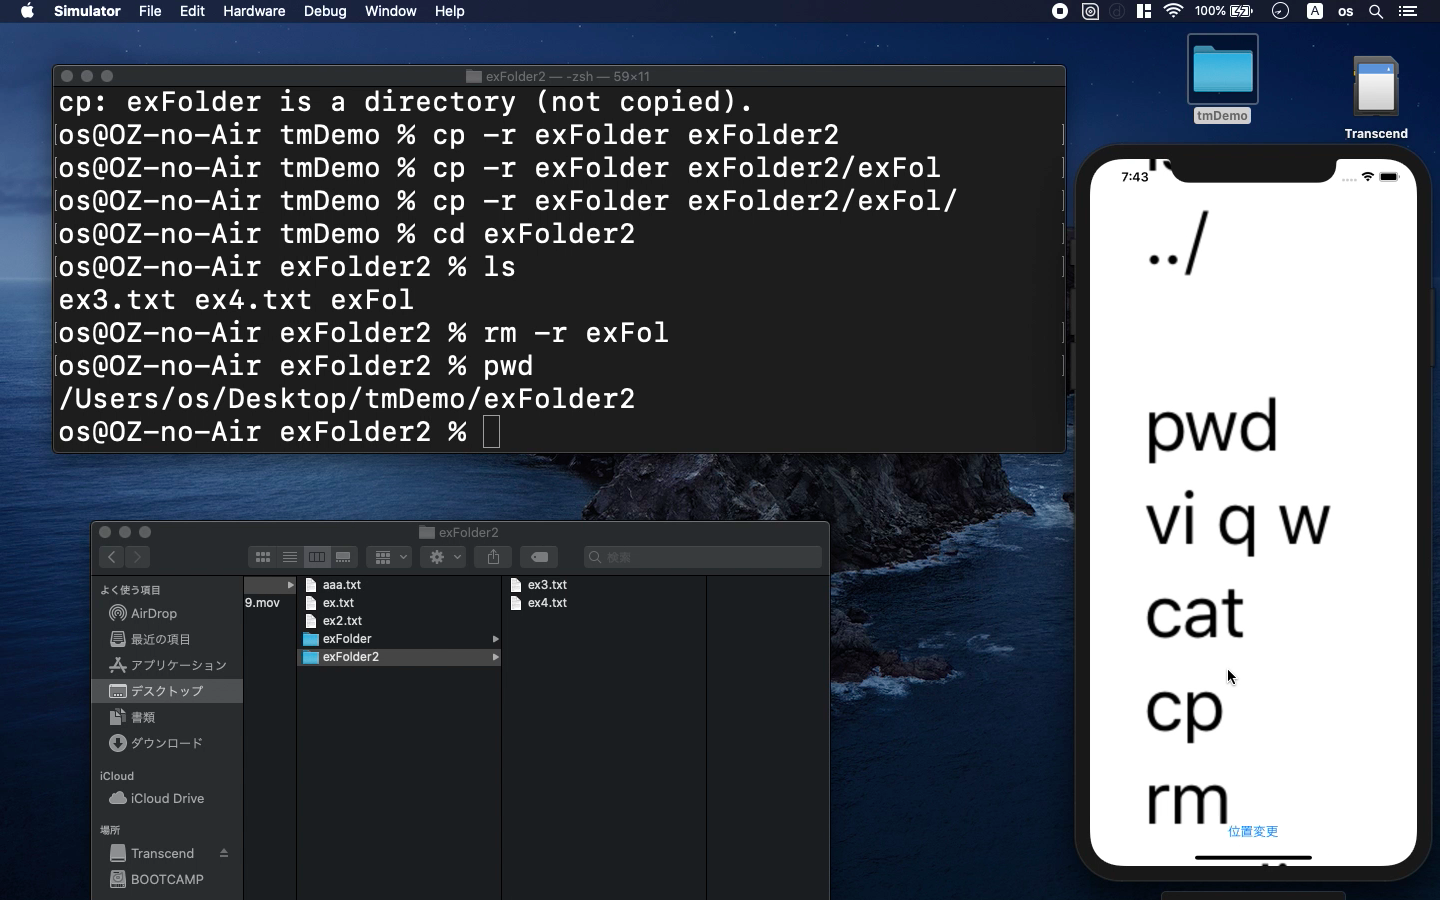 Shell scripts that Beginner should study are linux commands from shell command prompt
